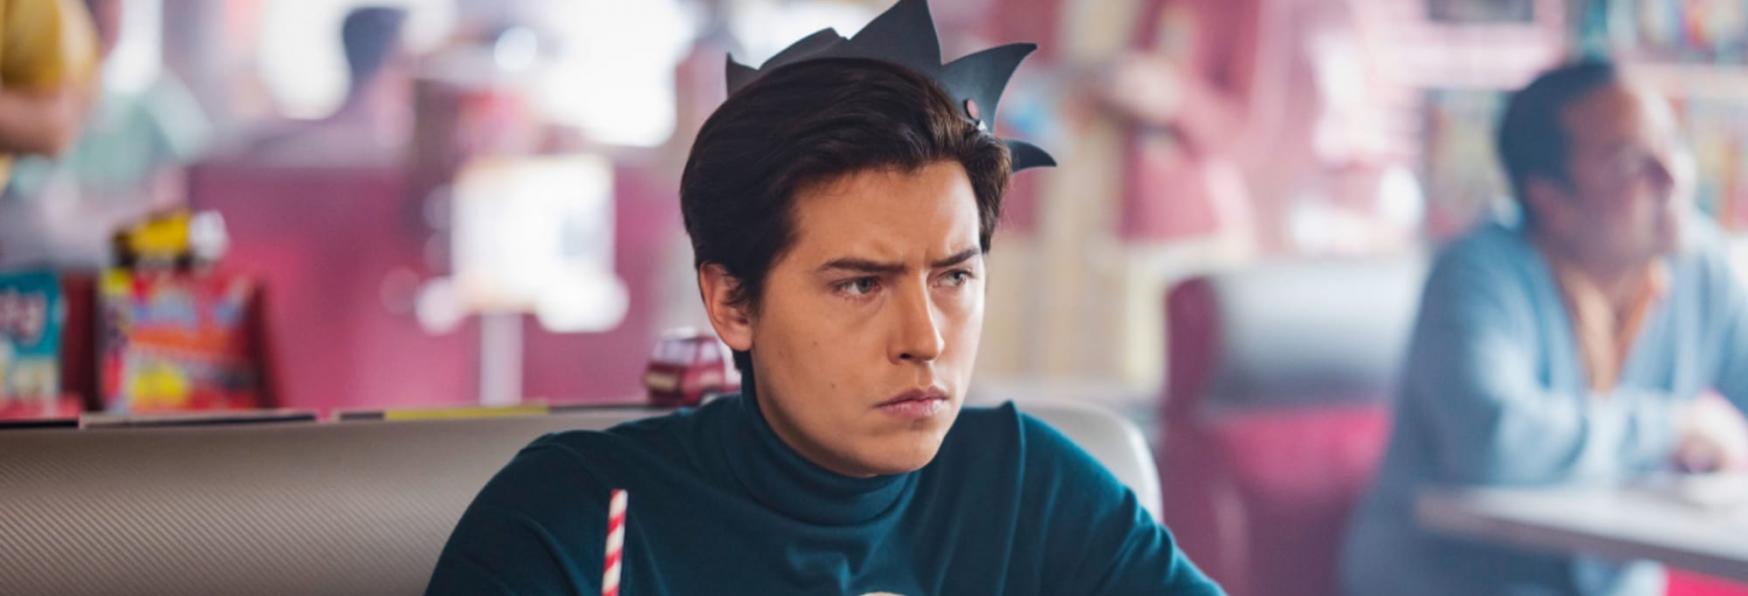 Riverdale 6x18: la Sinossi del nuovo Episodio, “Chapter One Hundred and Thirteen: Biblical”